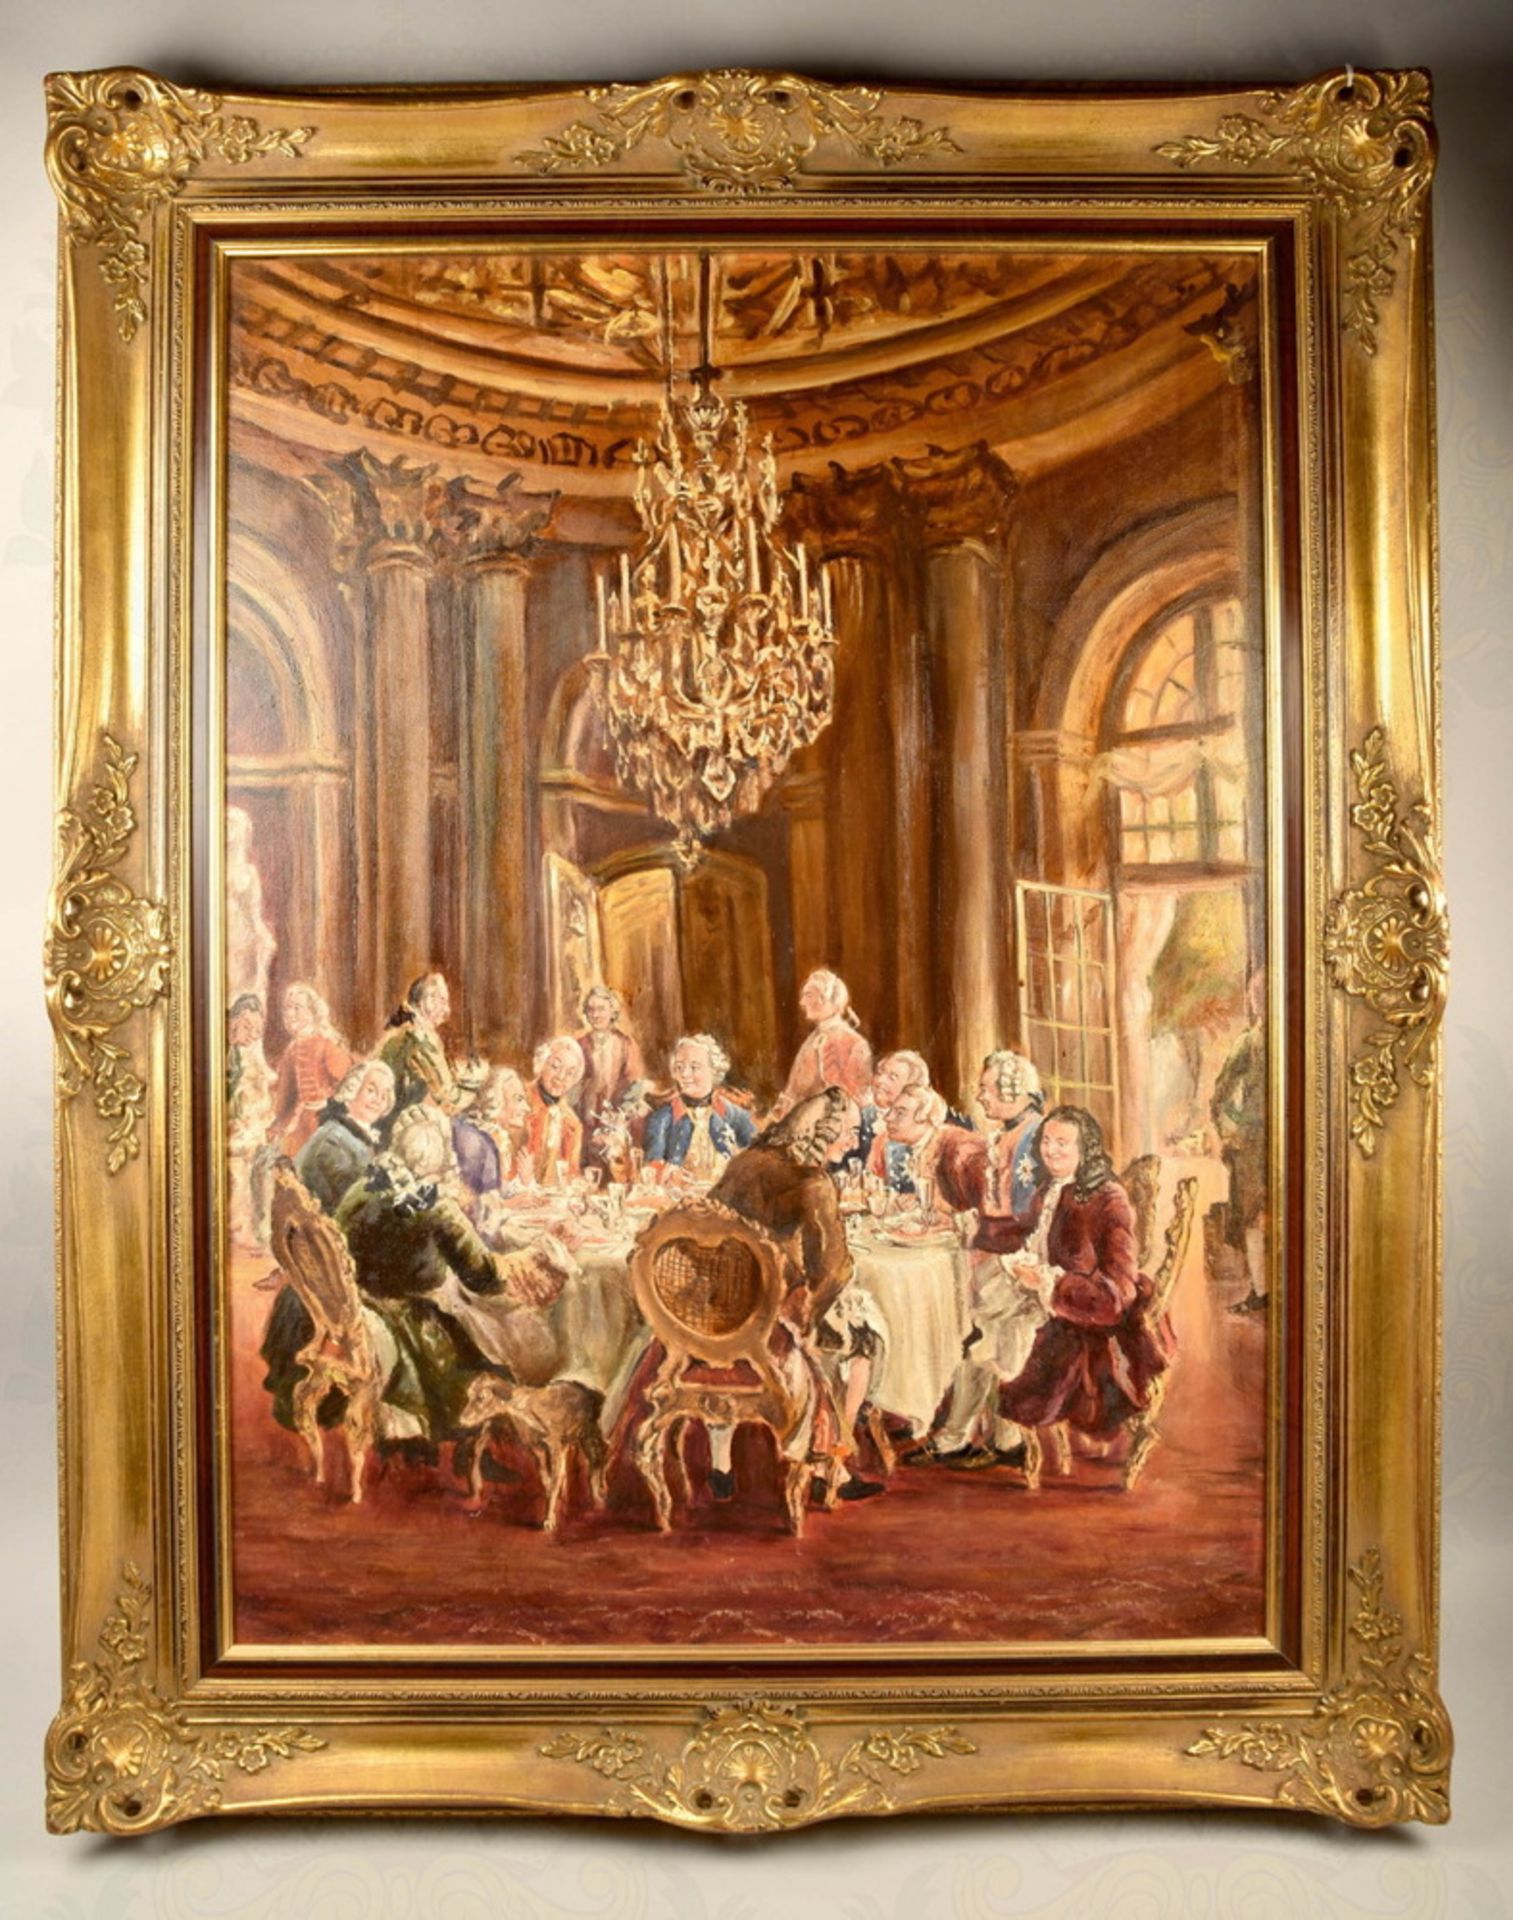 Oil painting Frederick the Great and company at table